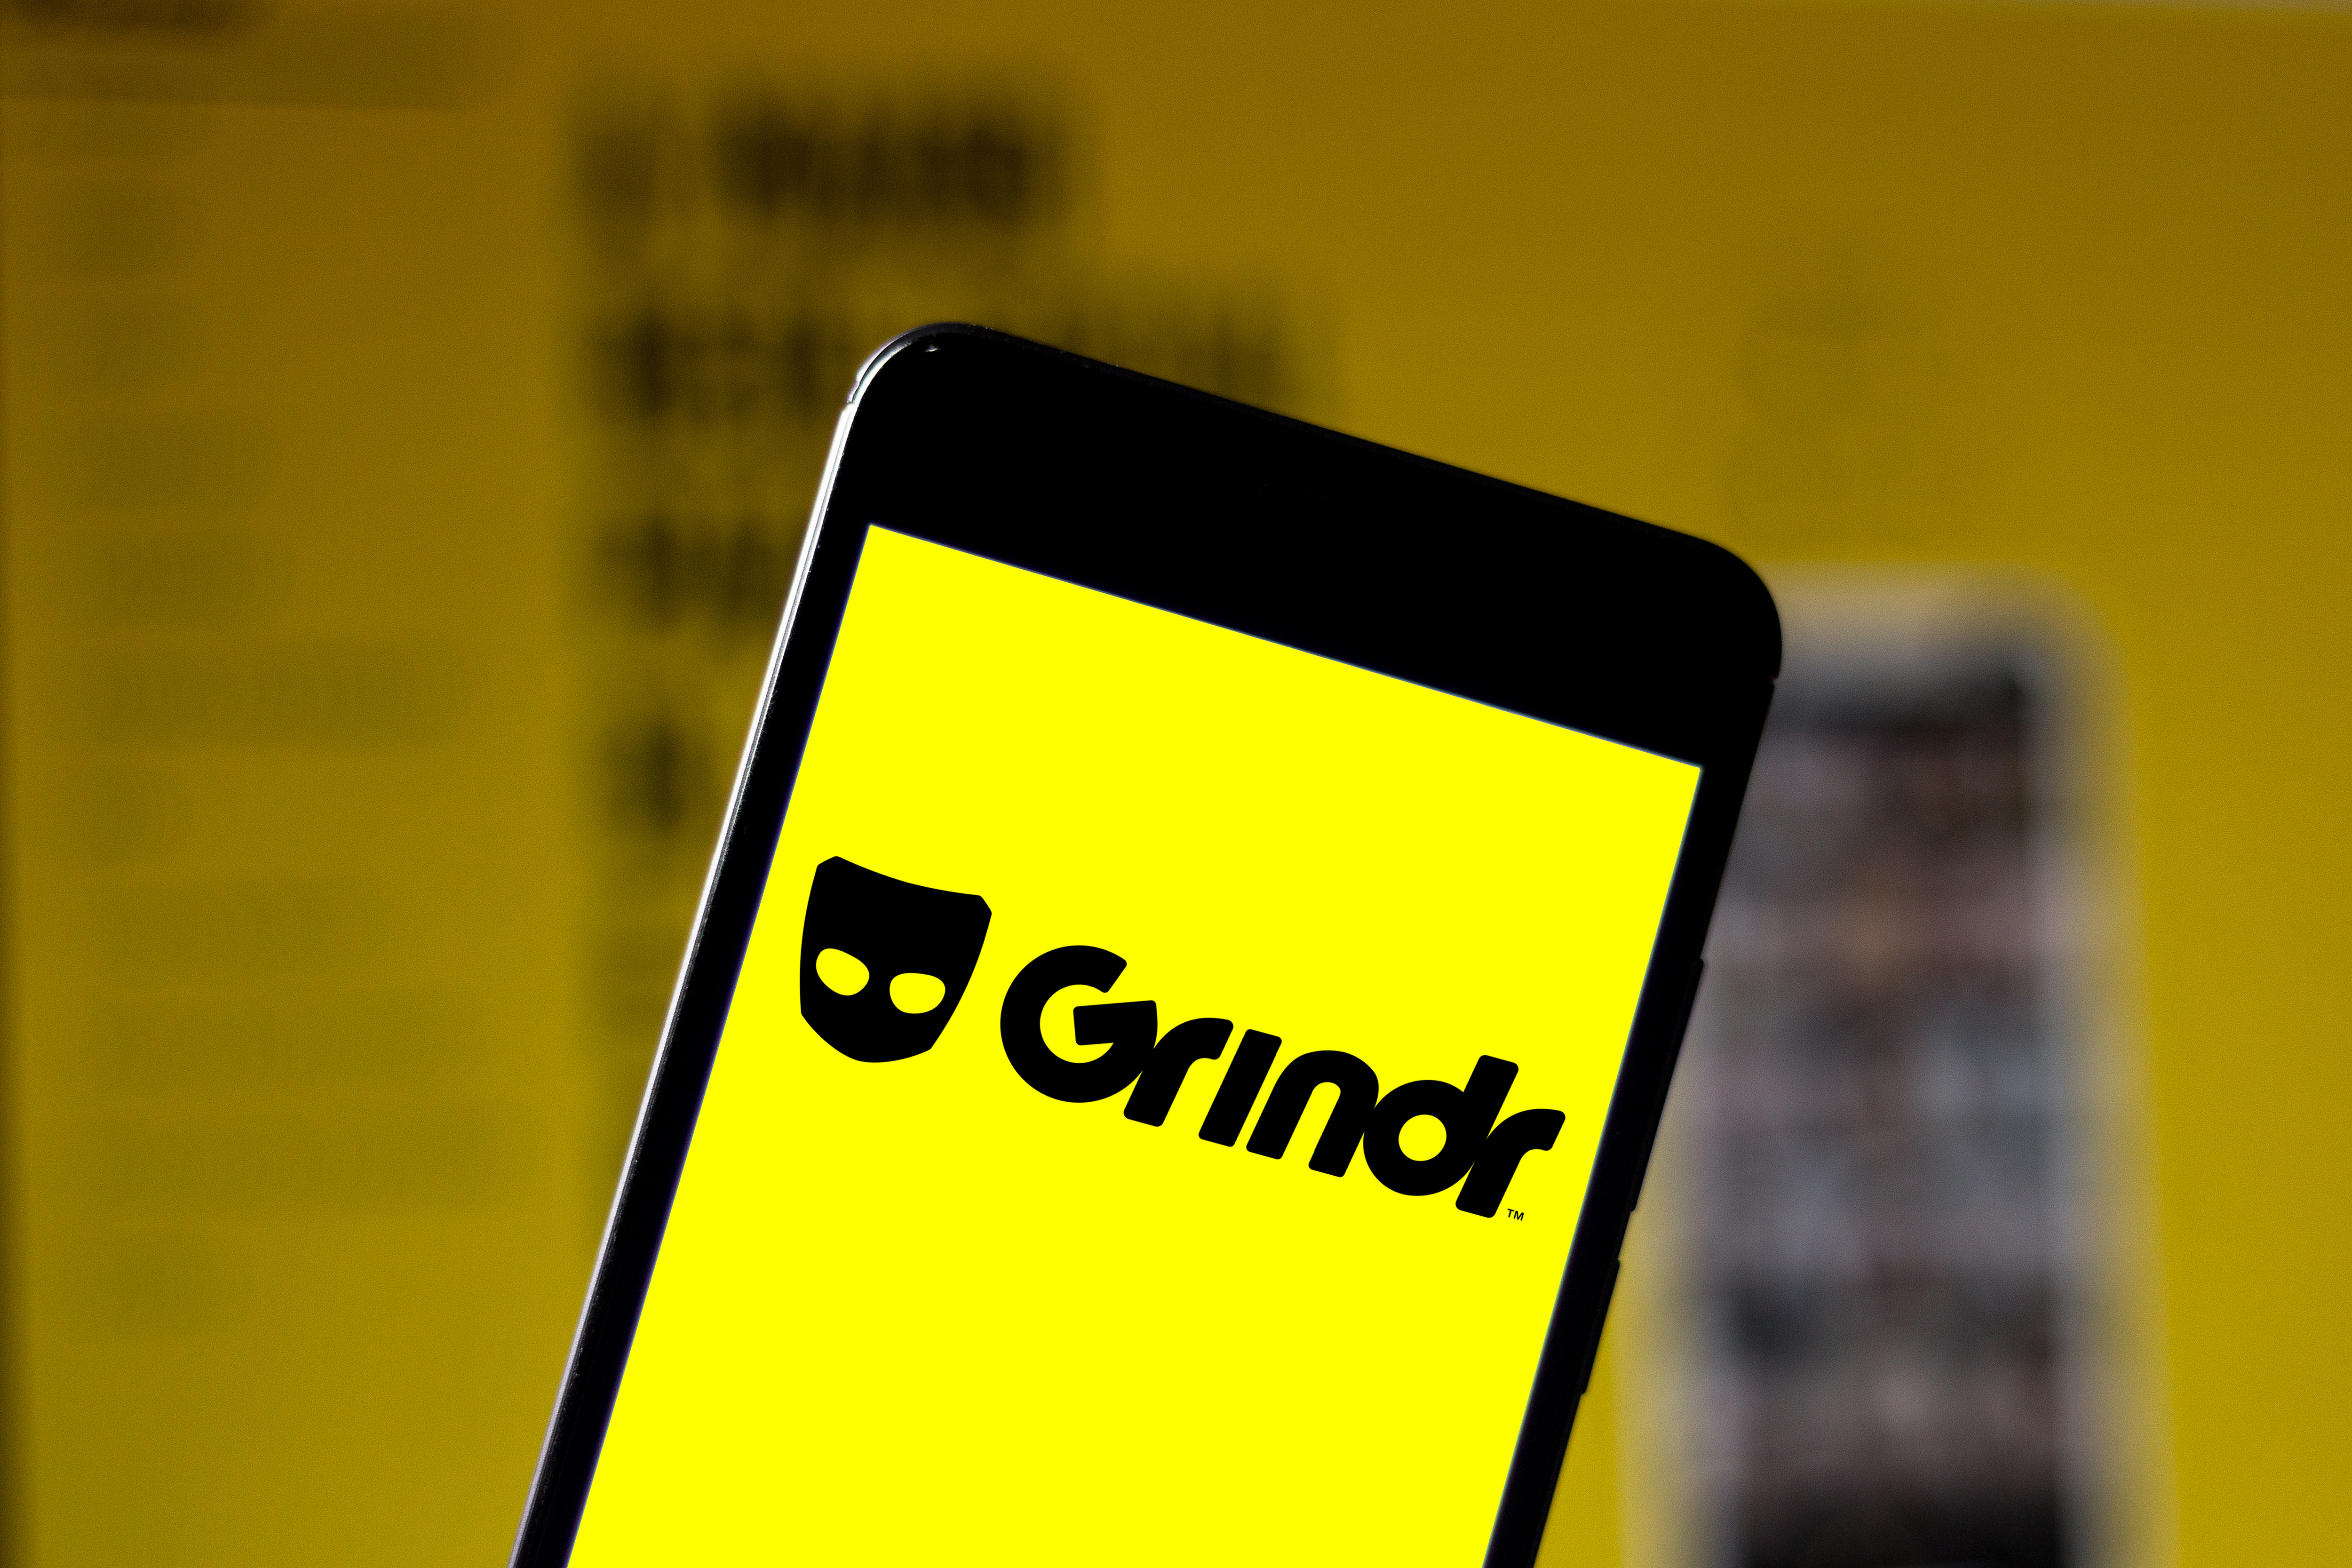 Hack grindr location A third